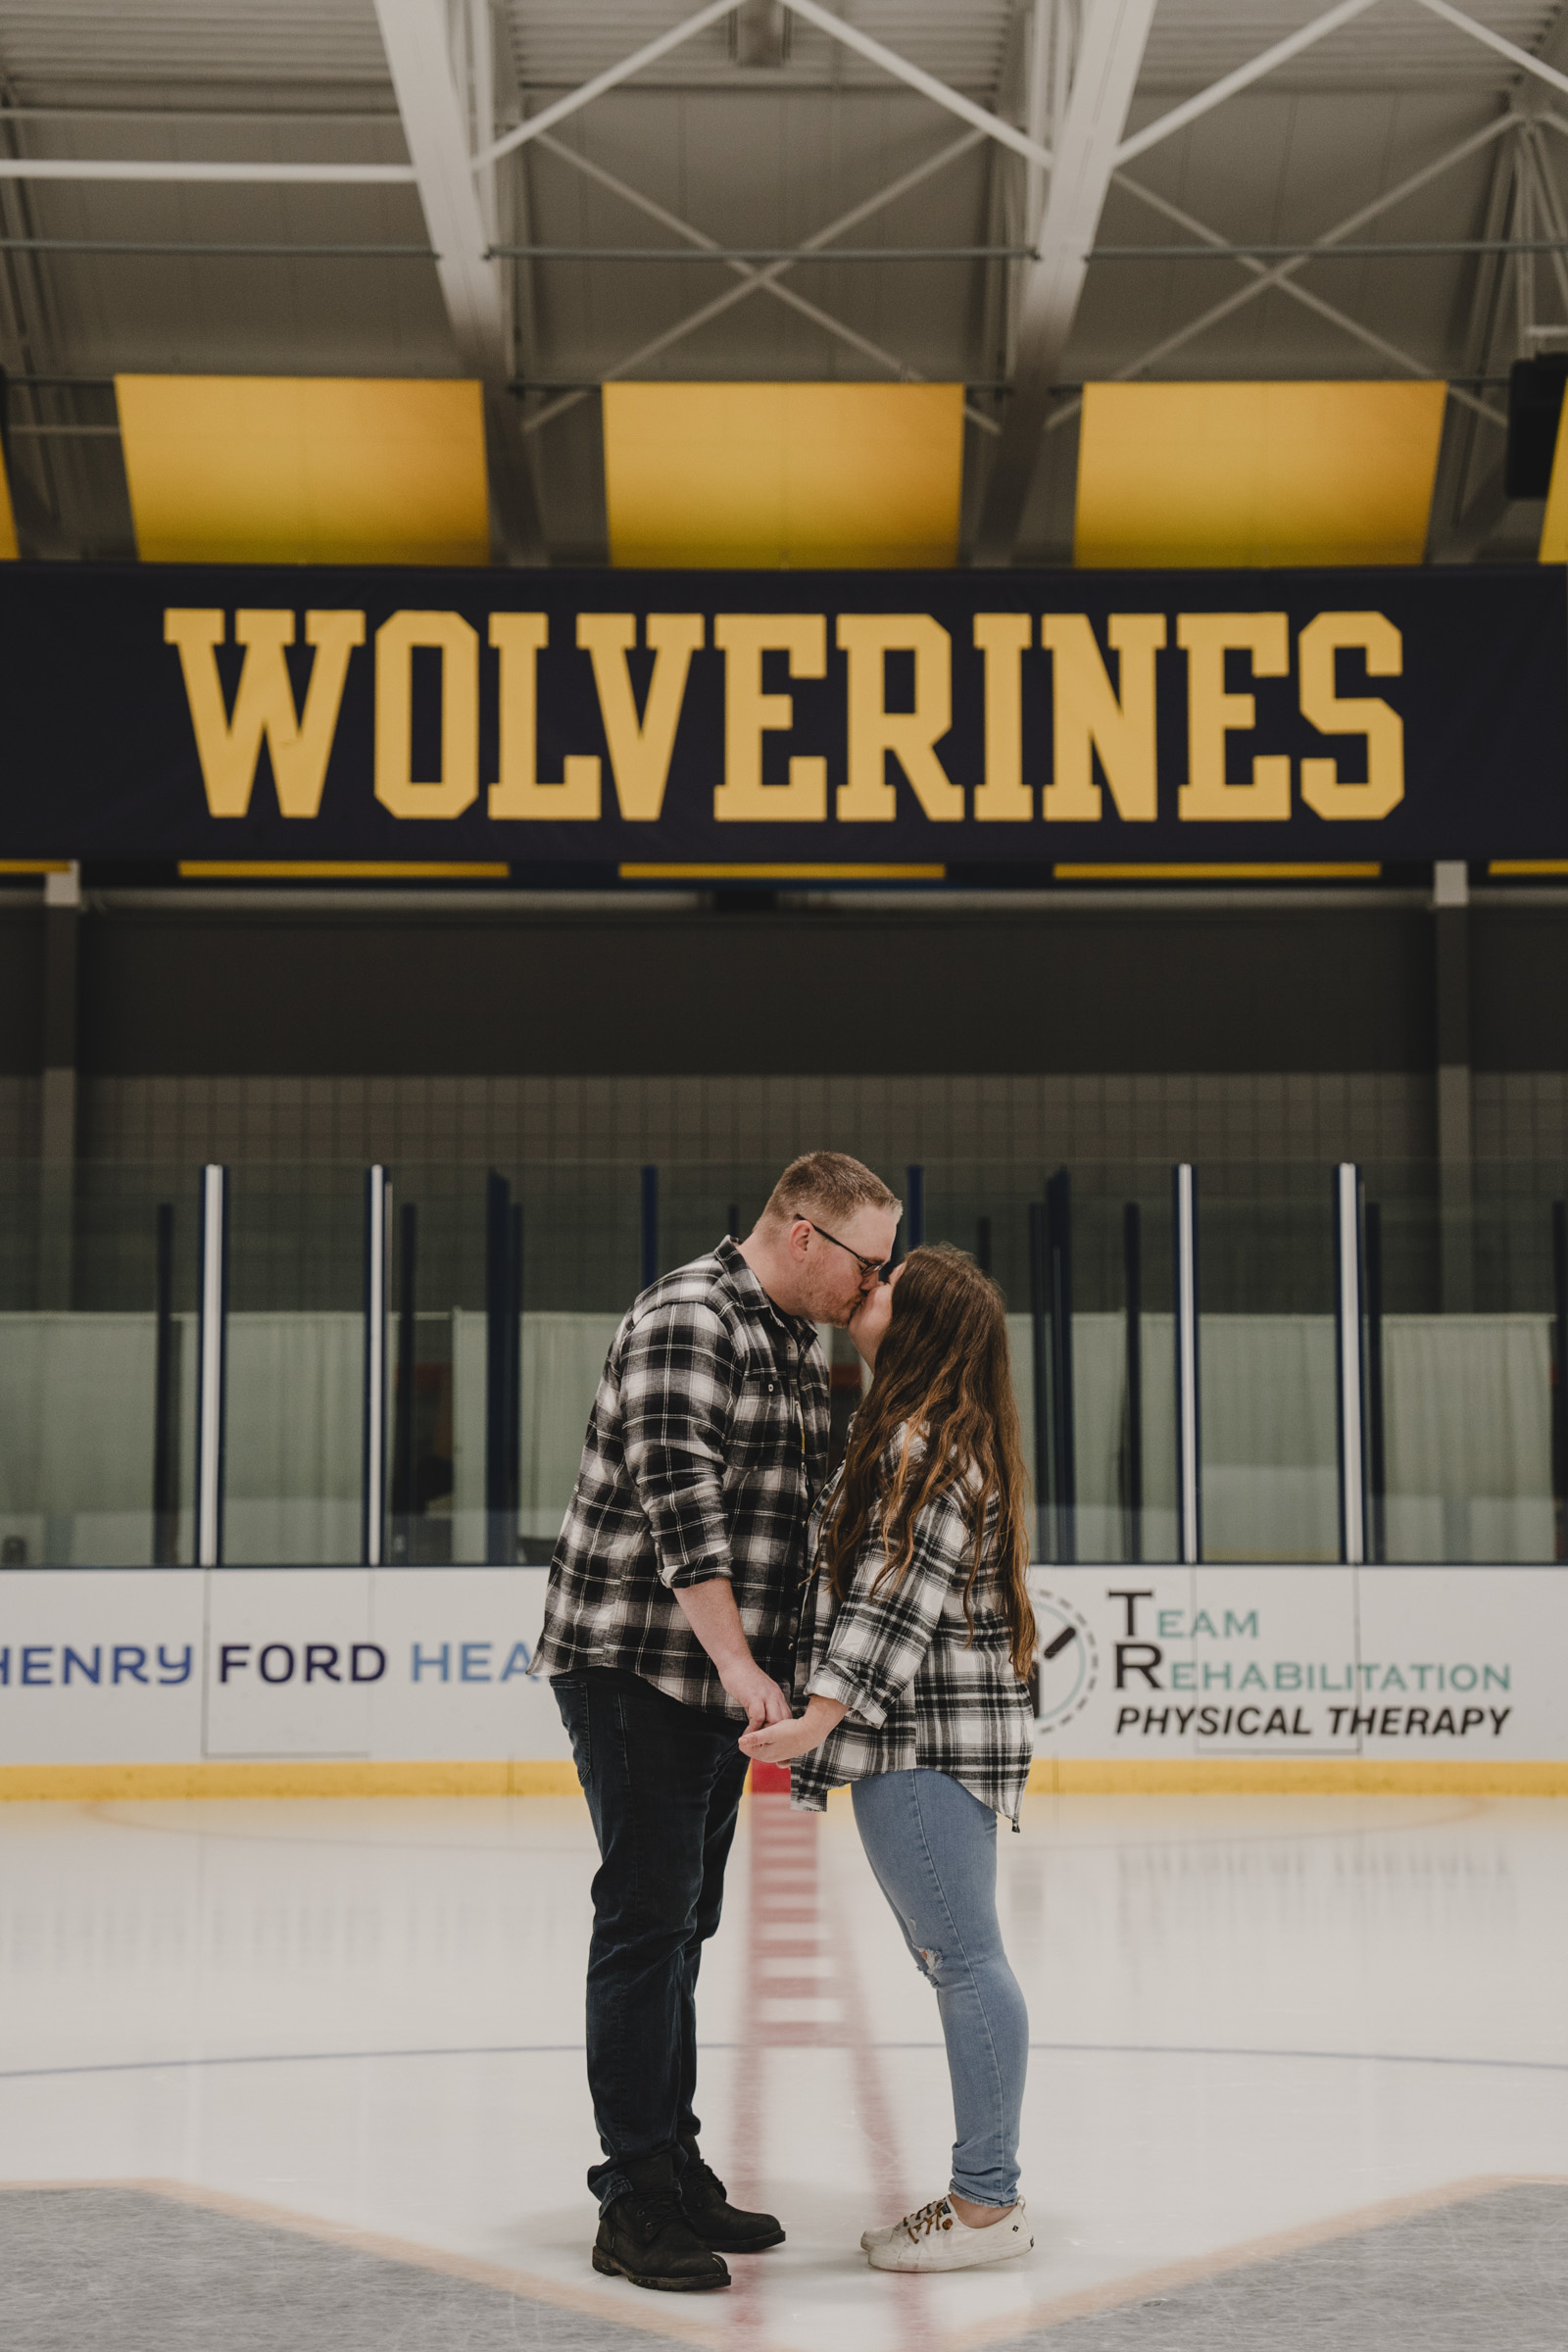 Allyssa Kerby and Nick McCutcheon kiss at center ice of a hockey area